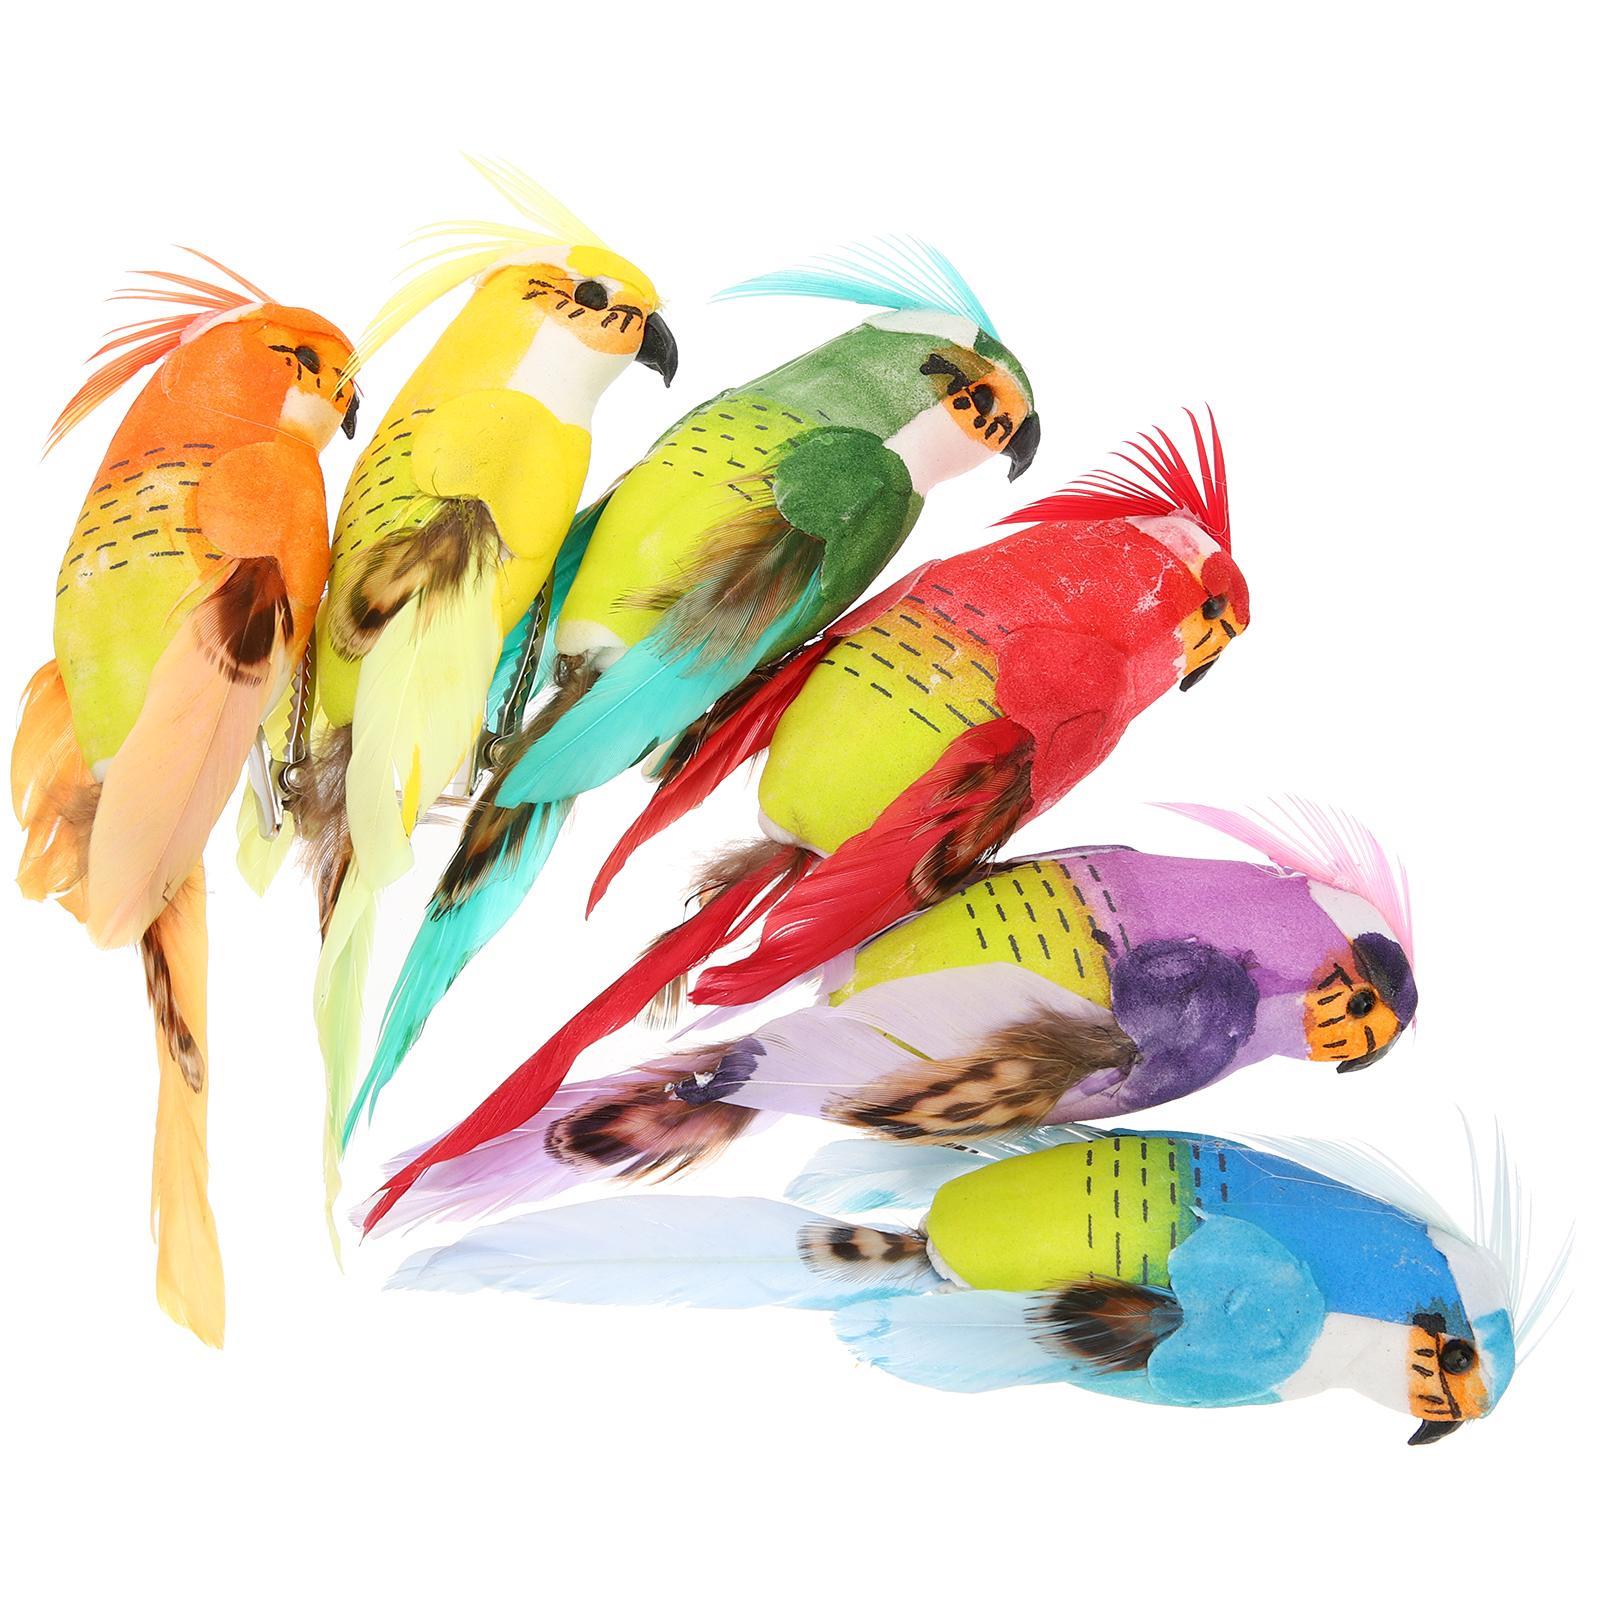 Decorate House Decorations Home Halloween Props Simulated Bird Ornament Accessories Clip Fake Parrot Artificial